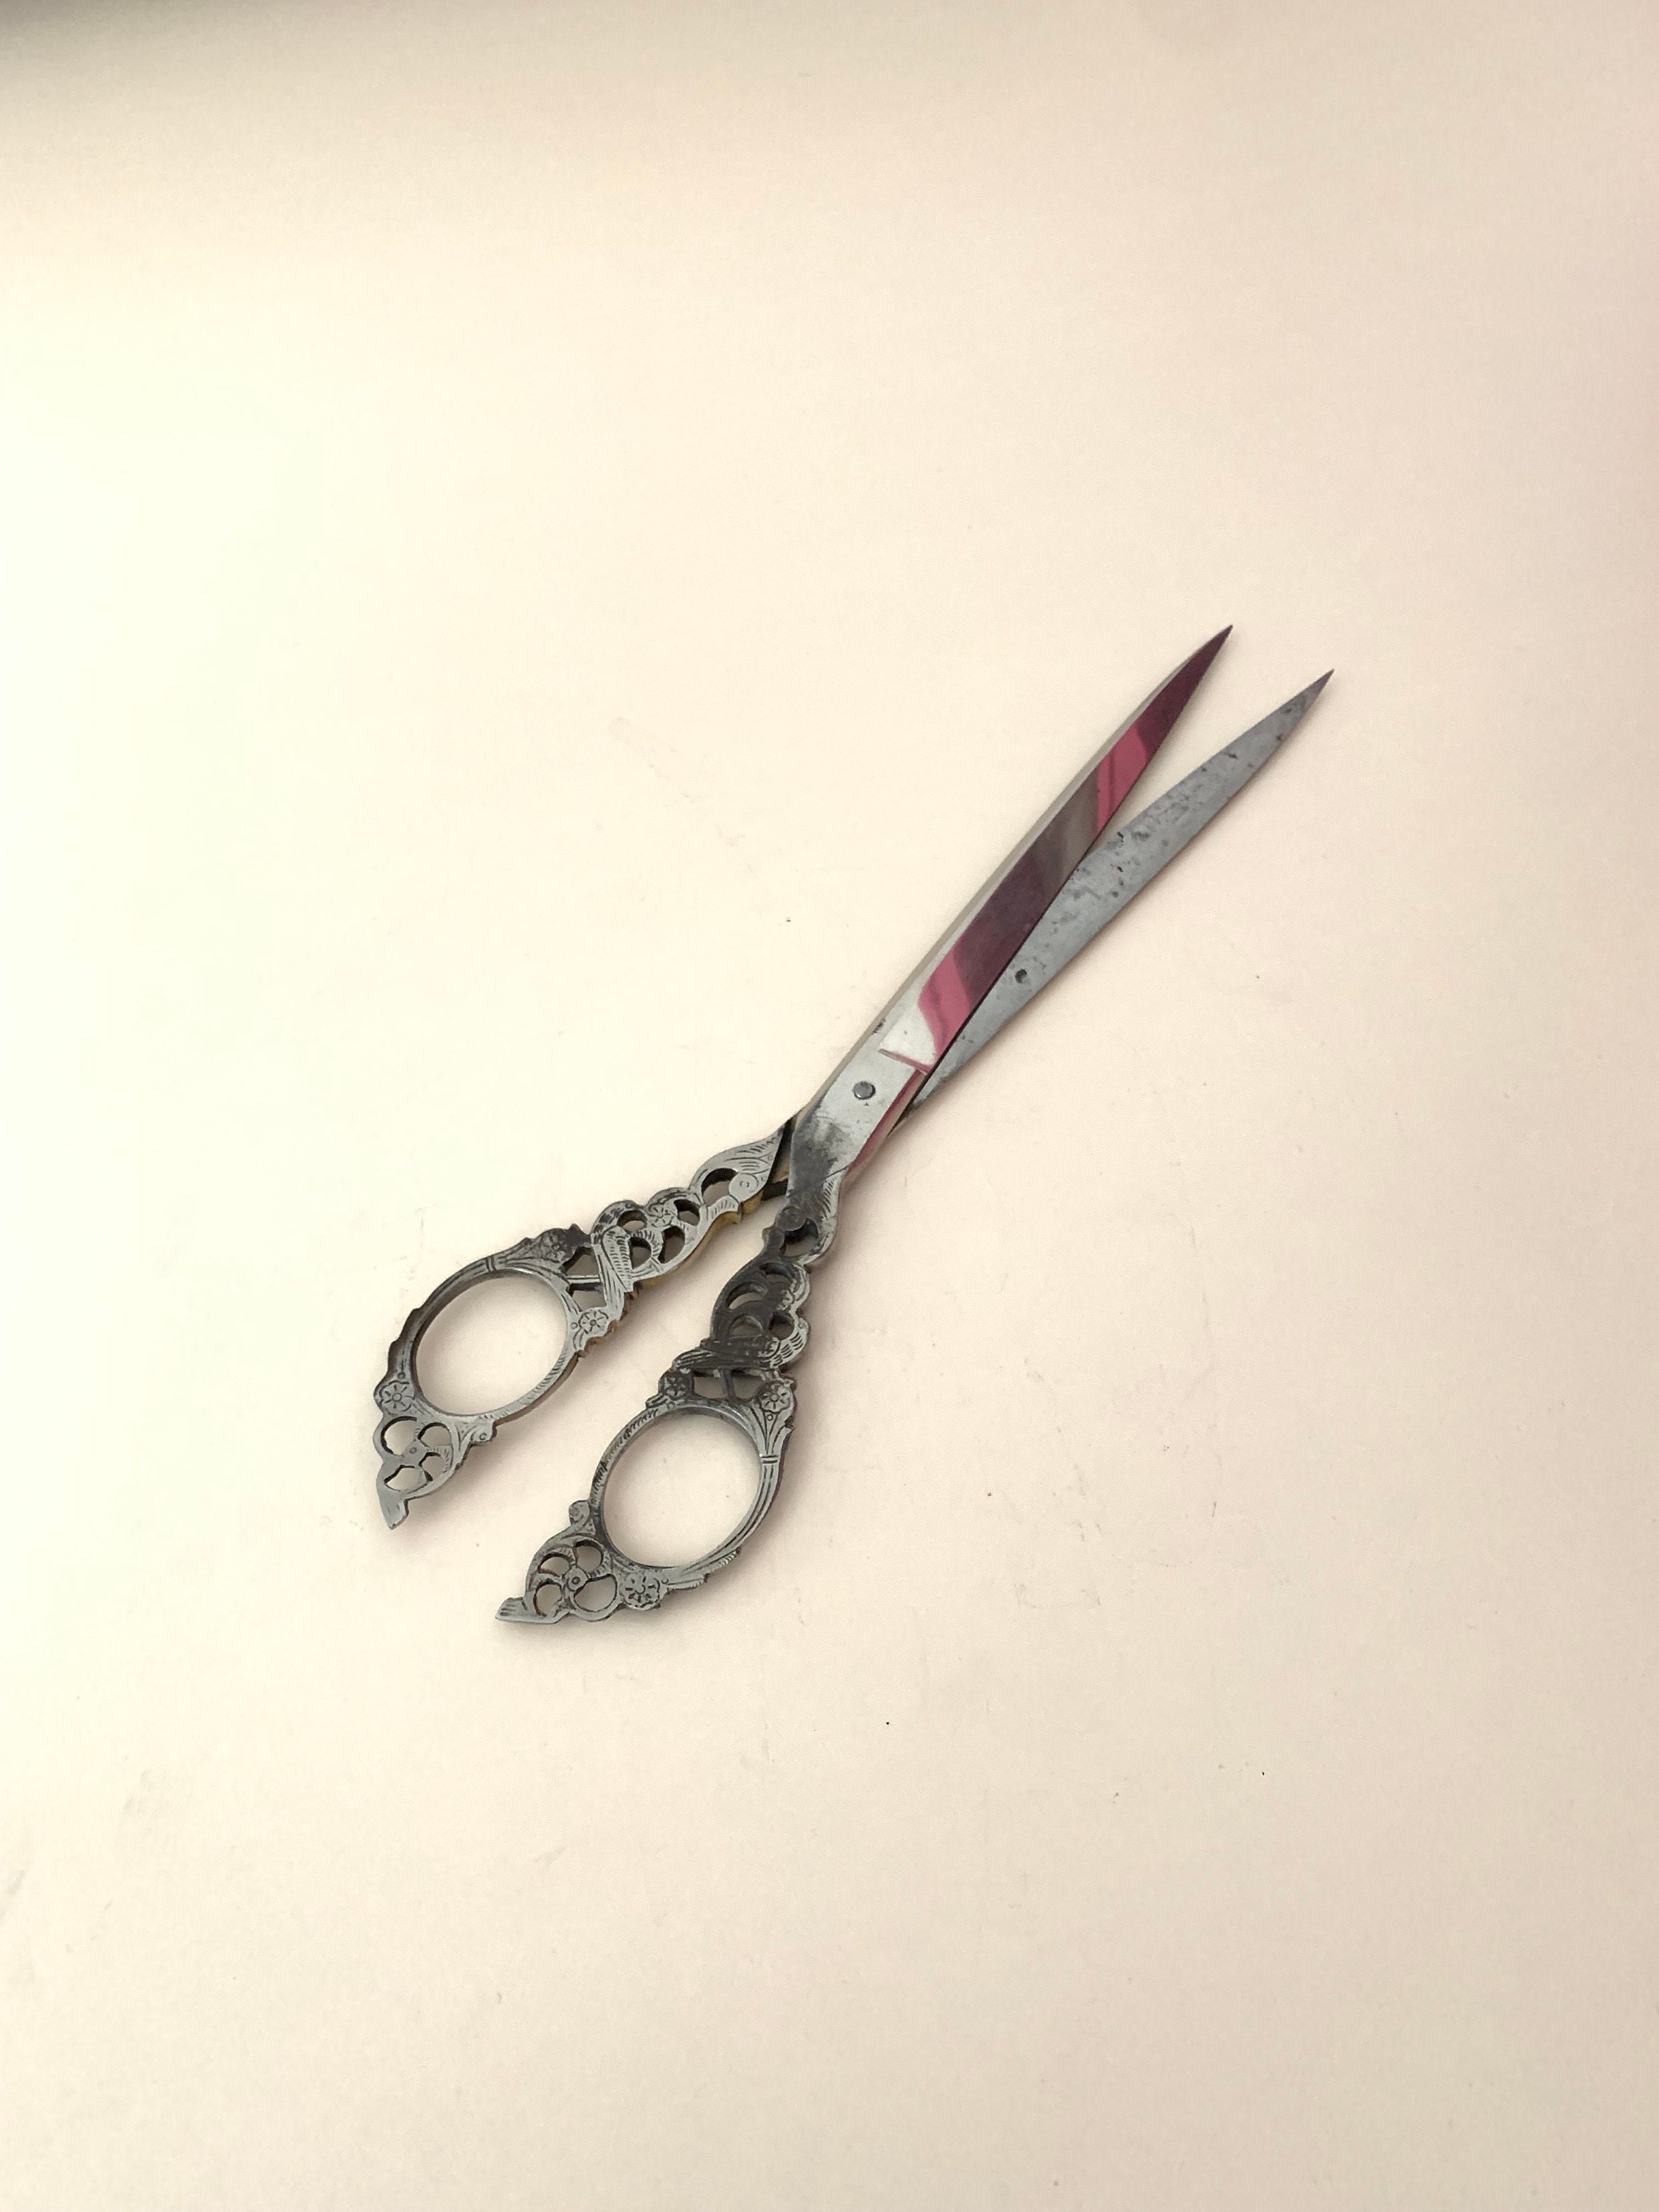 Vintage Decorative Scissors for Home Decor or Photography Flat